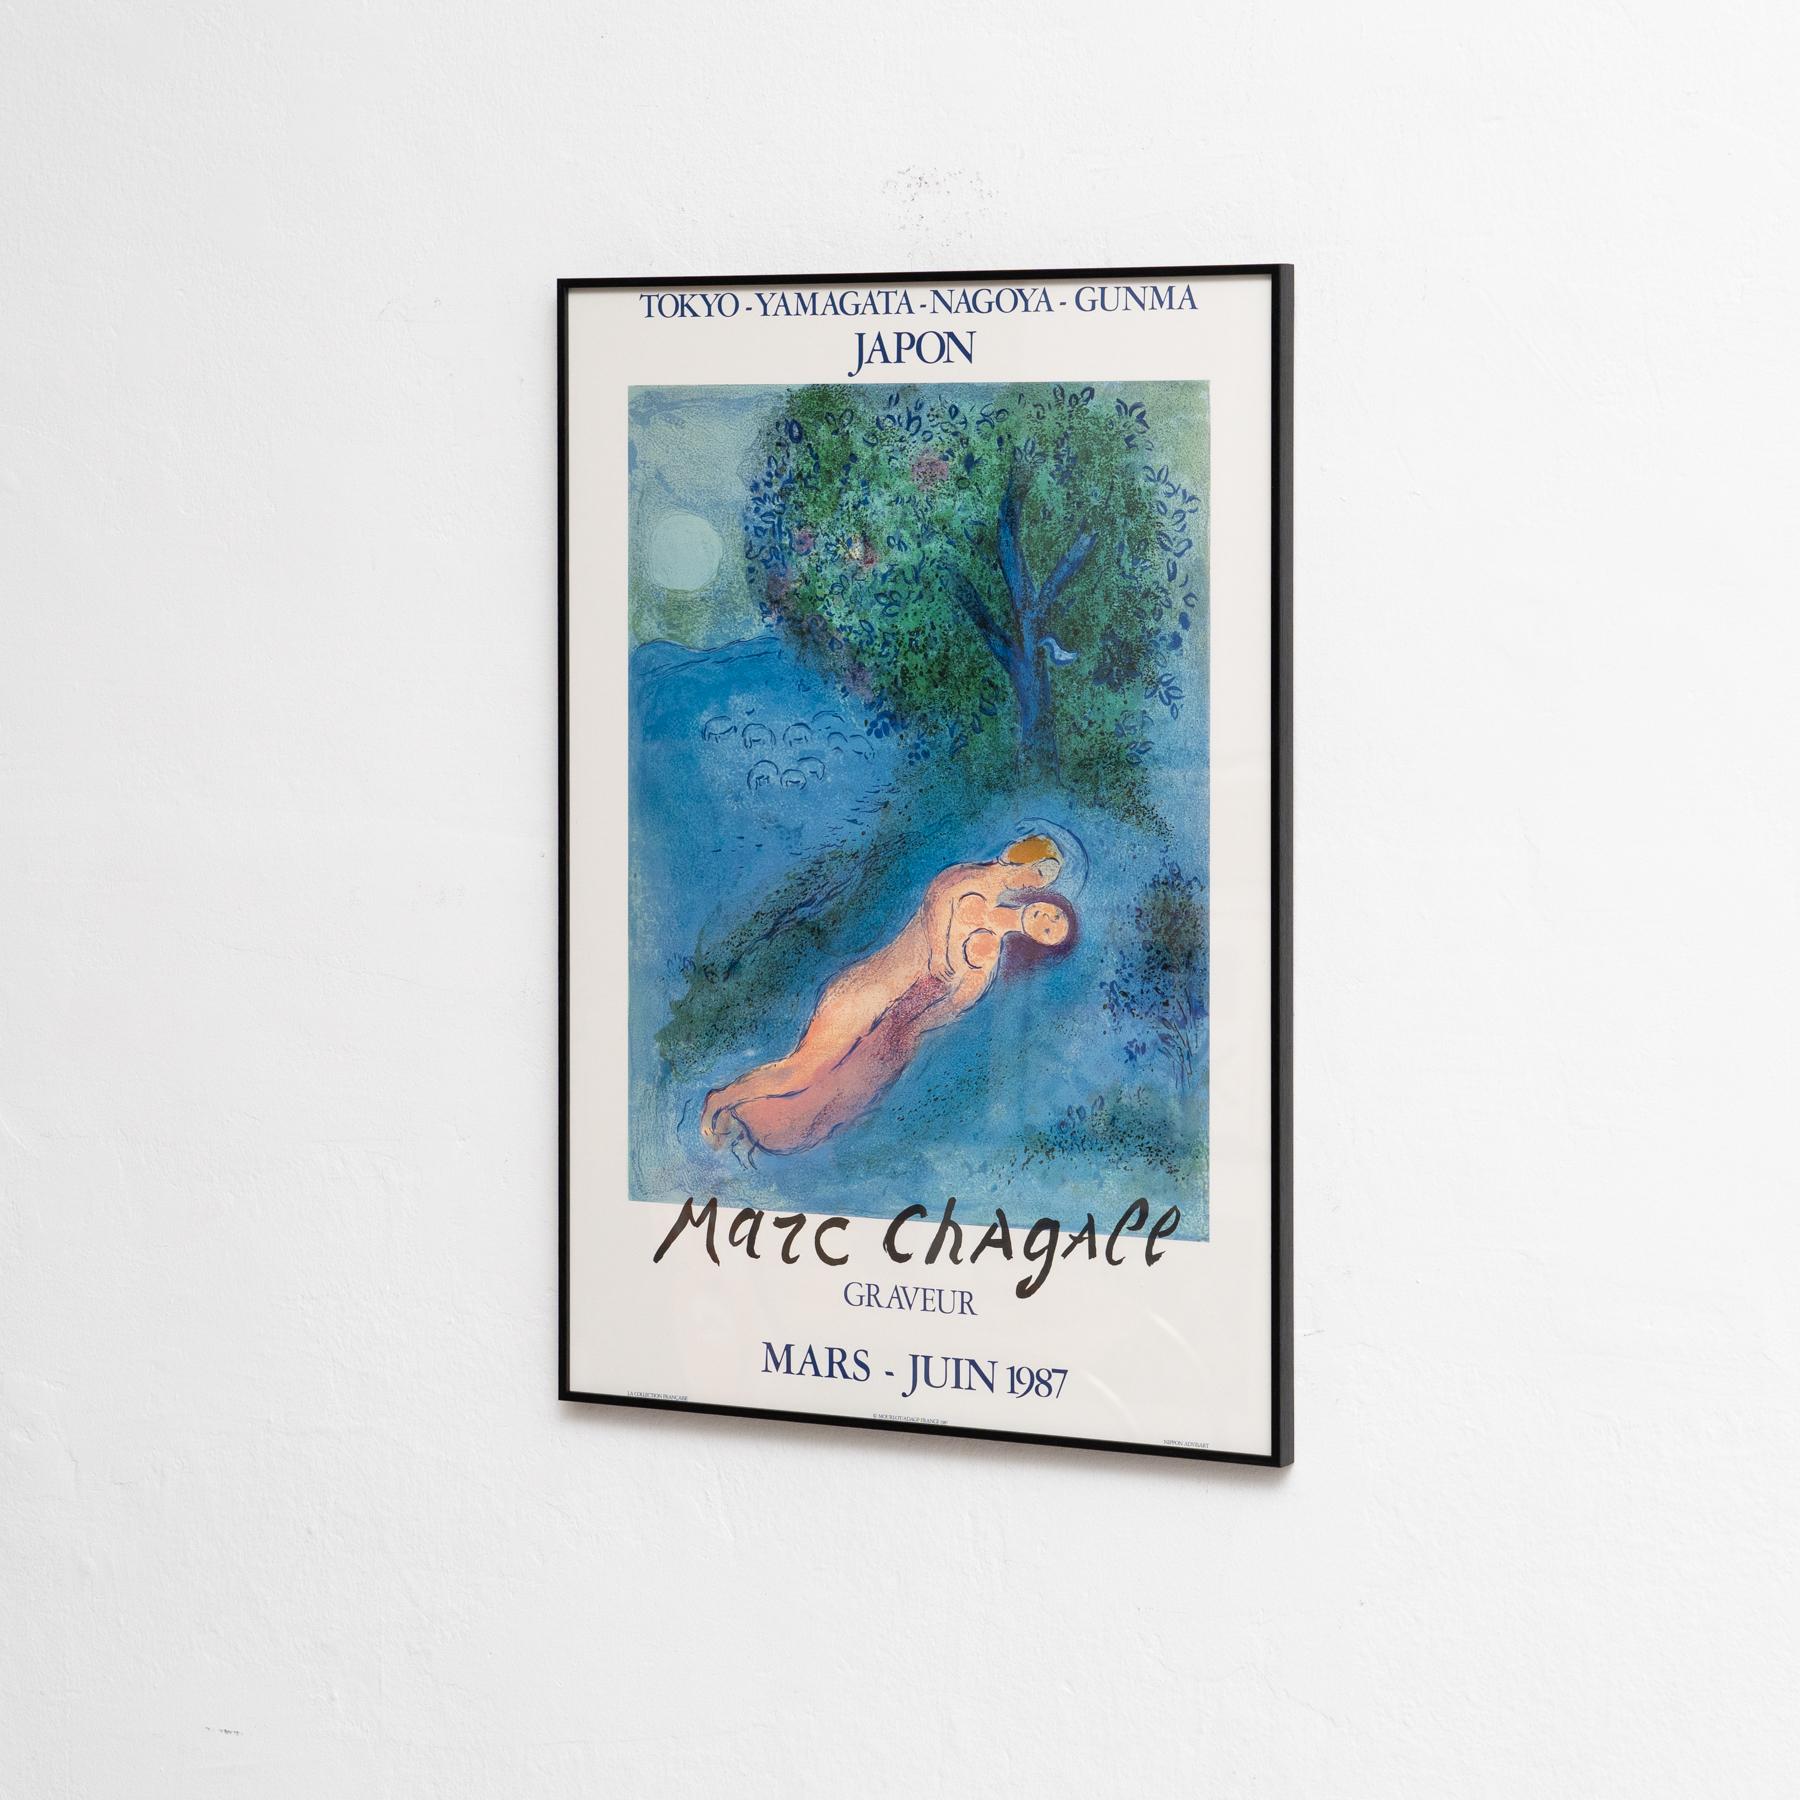 French Colorful Marc Chagall Poster: Printed by Mourlot in 1987 For Sale